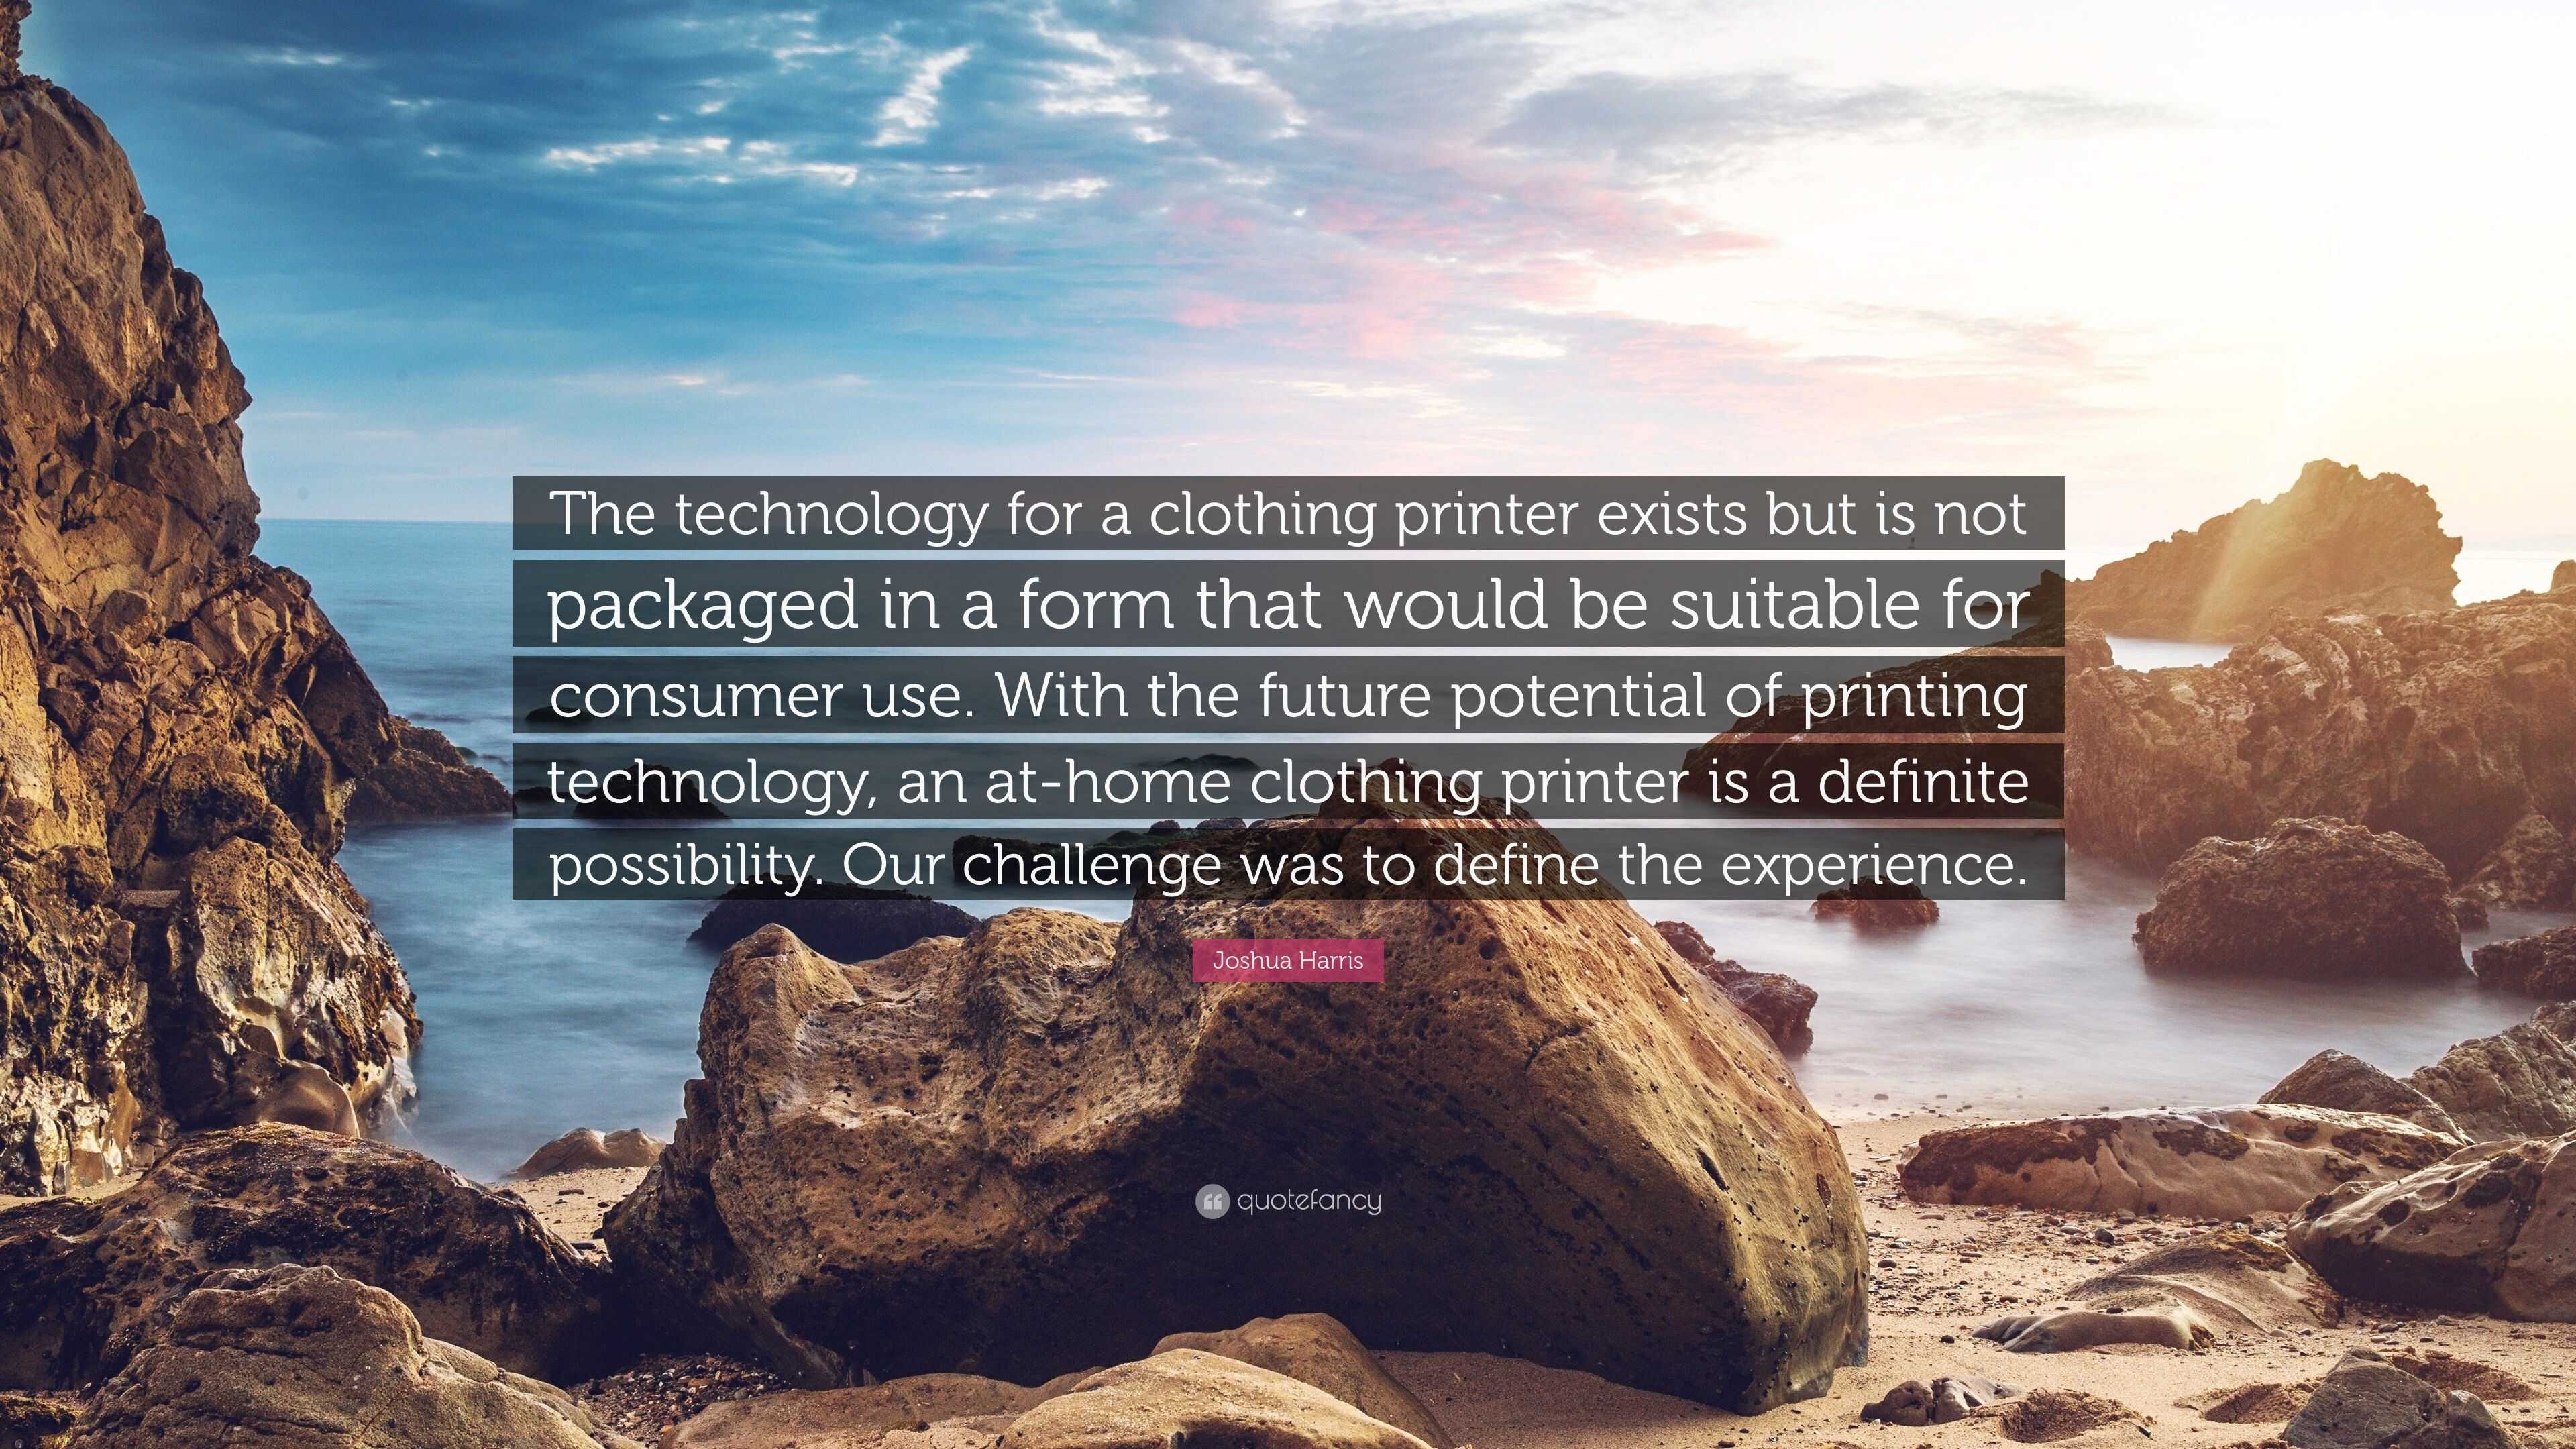 Joshua Harris Quote: “The technology for a clothing printer exists but is  not packaged in a form that would be suitable for consumer use. With”